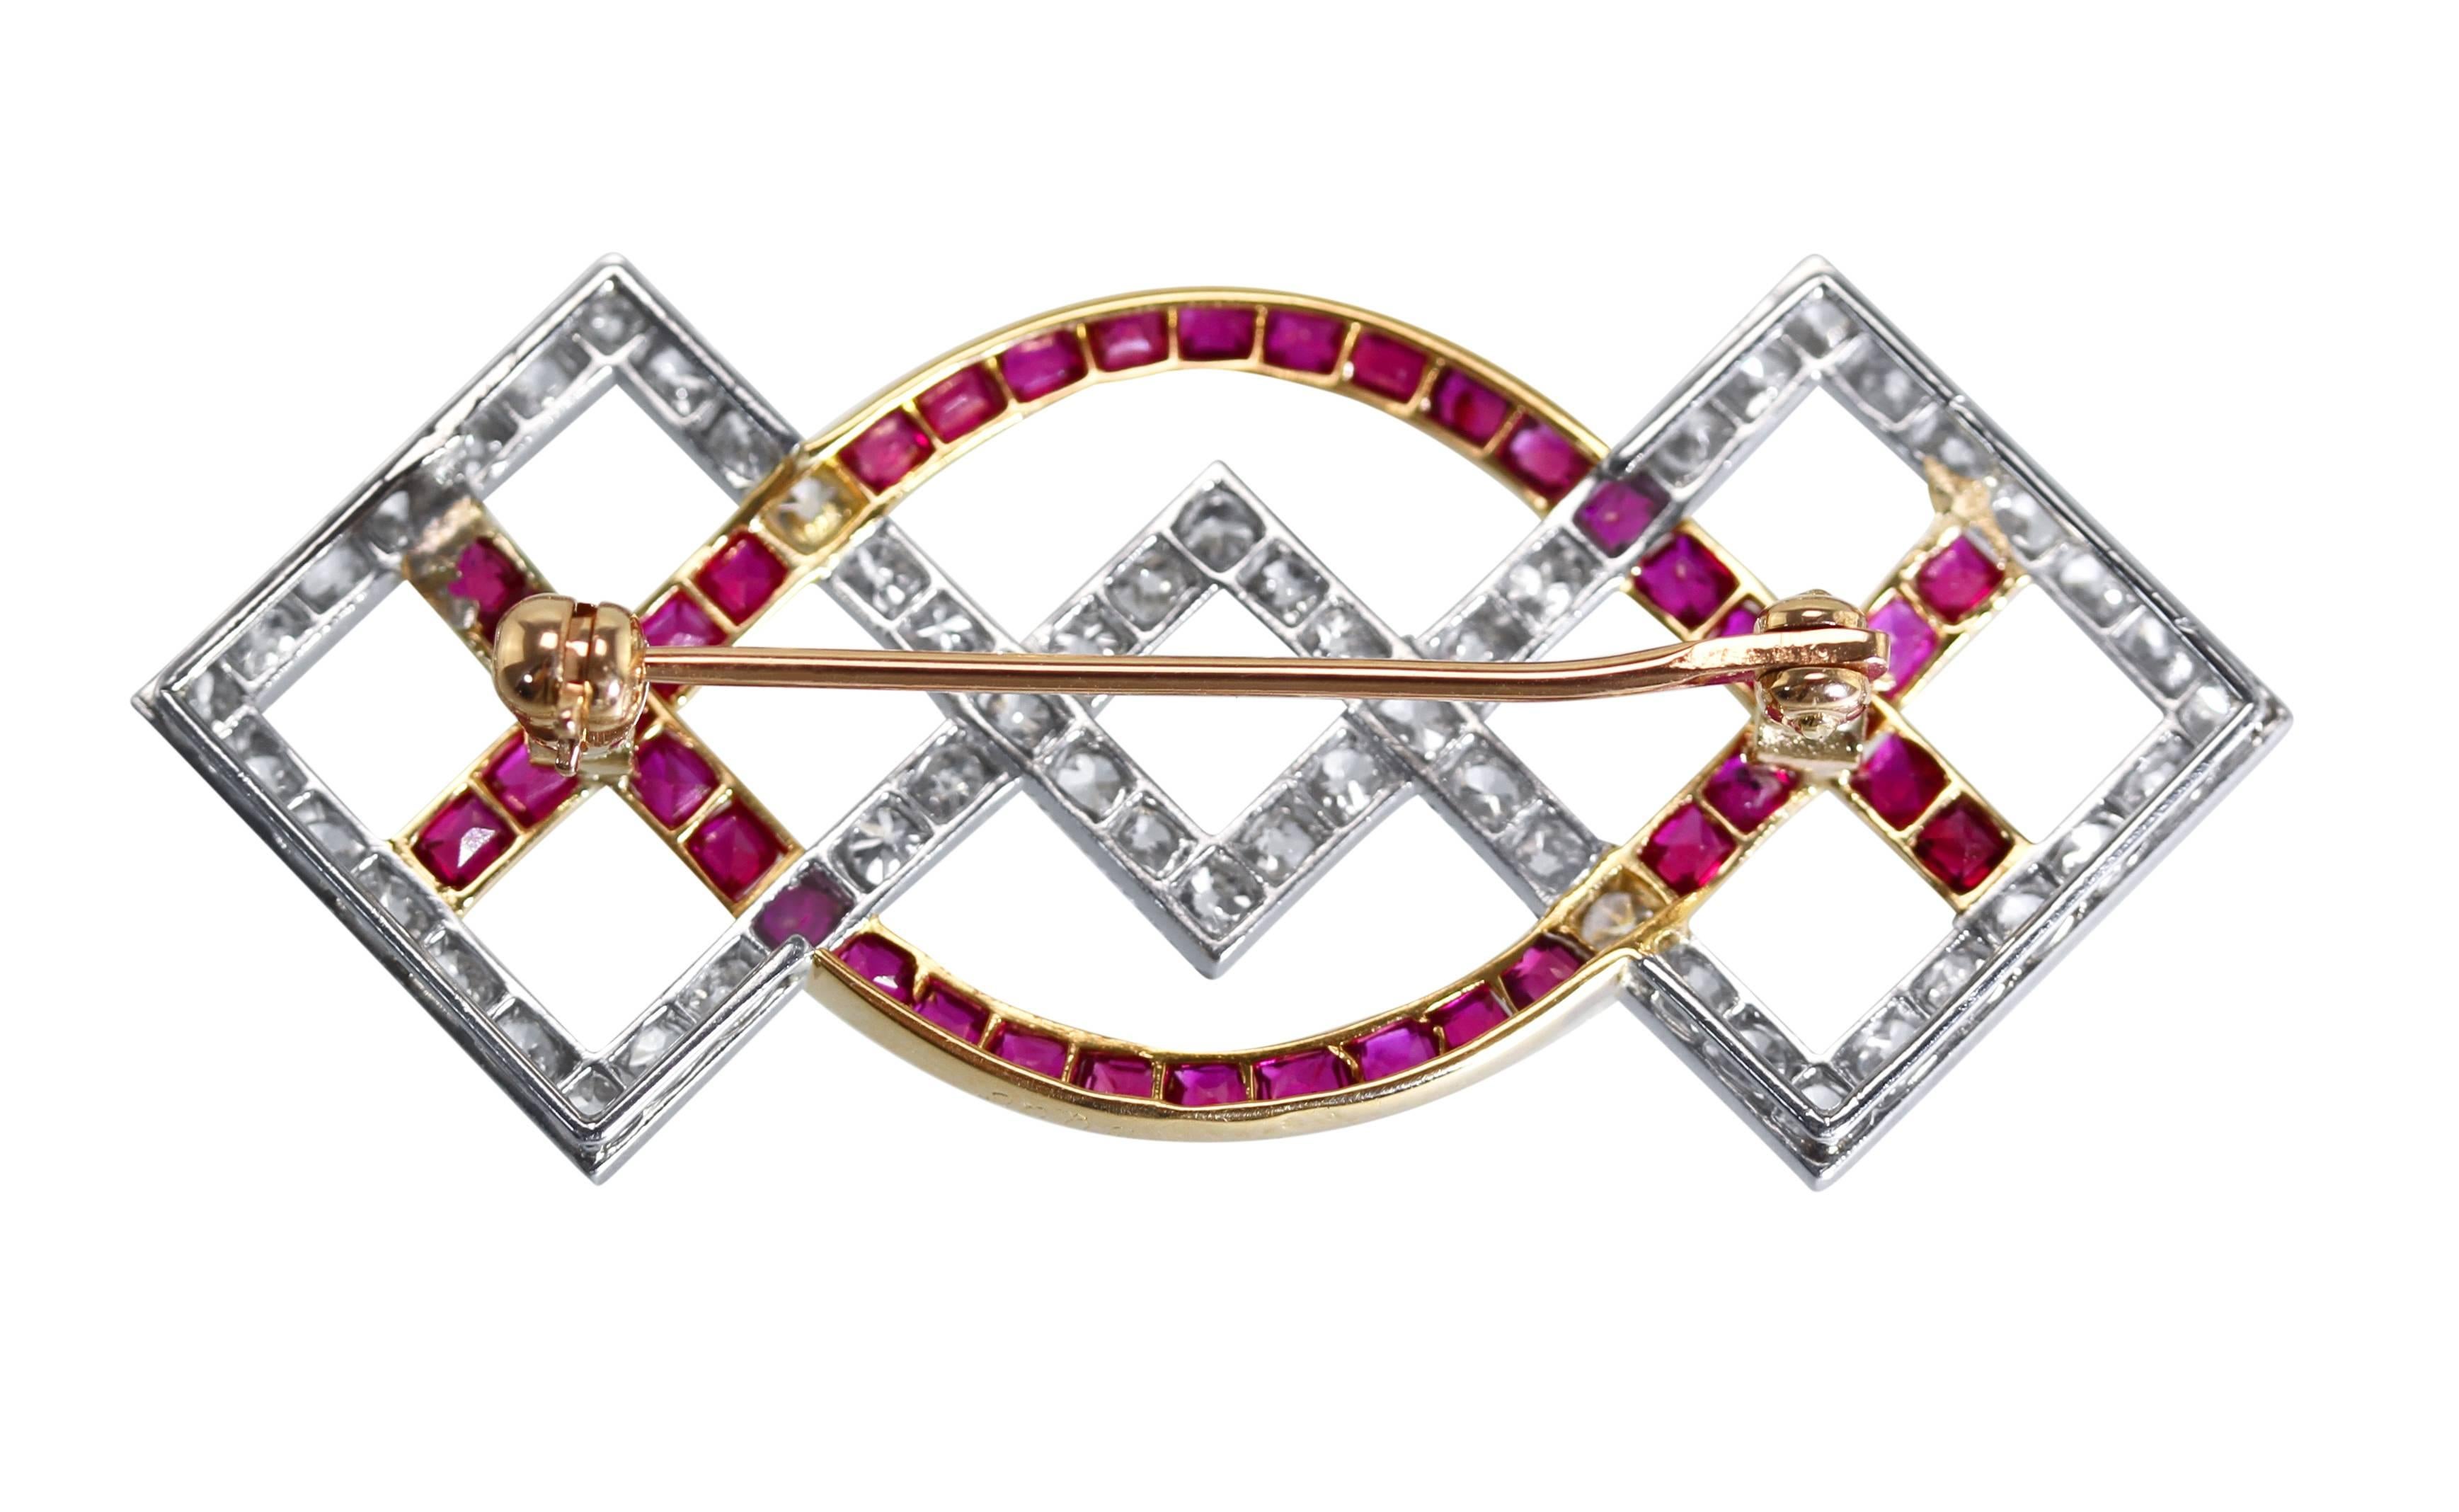 Art Deco Platinum, 18 Karat Gold, Ruby and Diamond Brooch by Cartier, Paris
• Signed Cartier Paris, numbered 2006, with French assay marks
• 57 old European-cut diamonds weighing approximately 1.25 carats
• 38 mixed-cut rubies weighing approximately